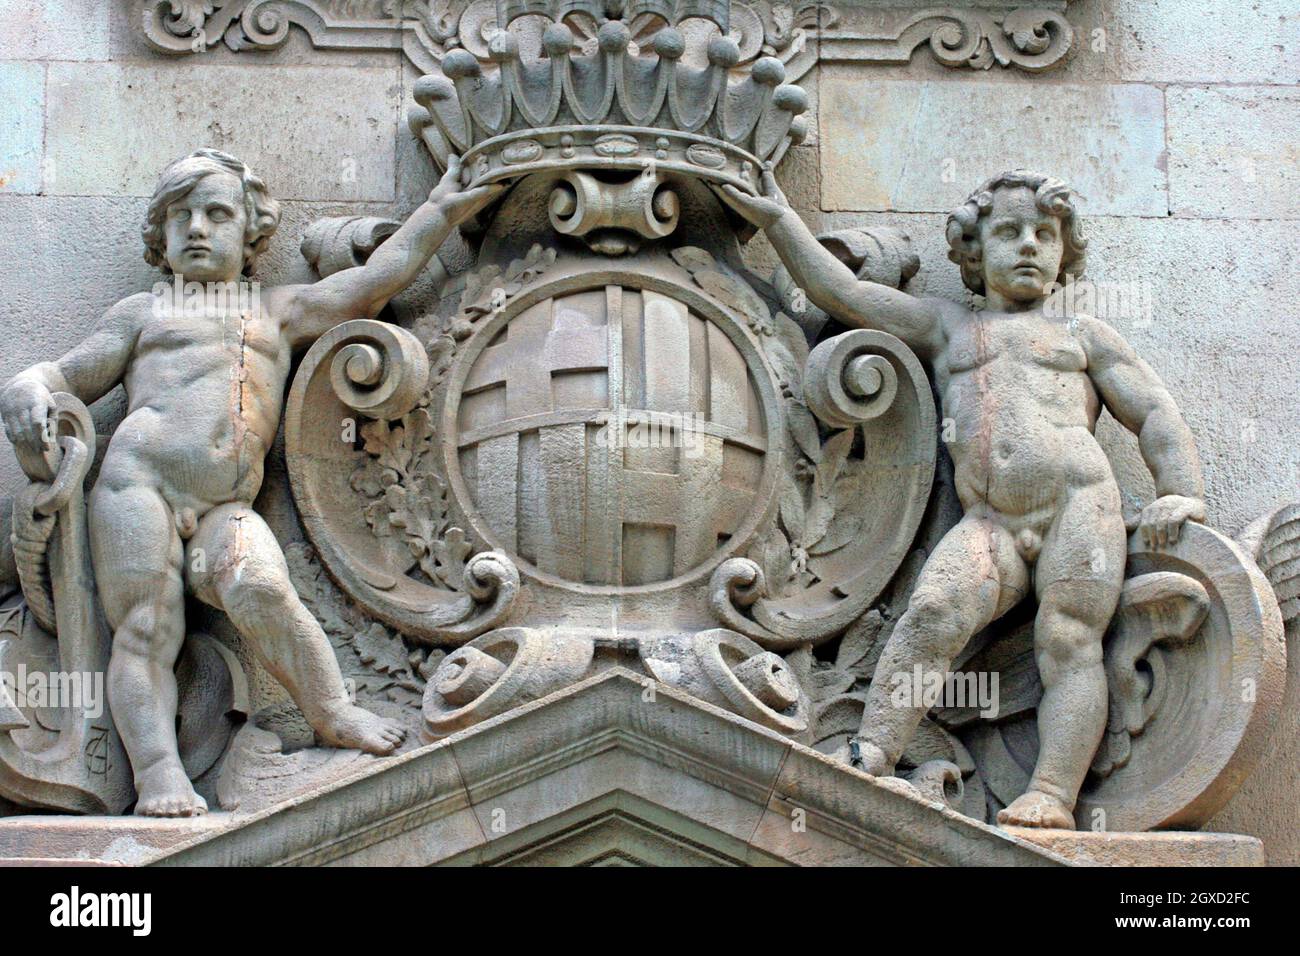 sculpture of the coat of arms of Barcelona by Eusebi Arnau, 1927, from the Correos y Telégrafos building, Barcelona, ??Catalonia, Spain Stock Photo